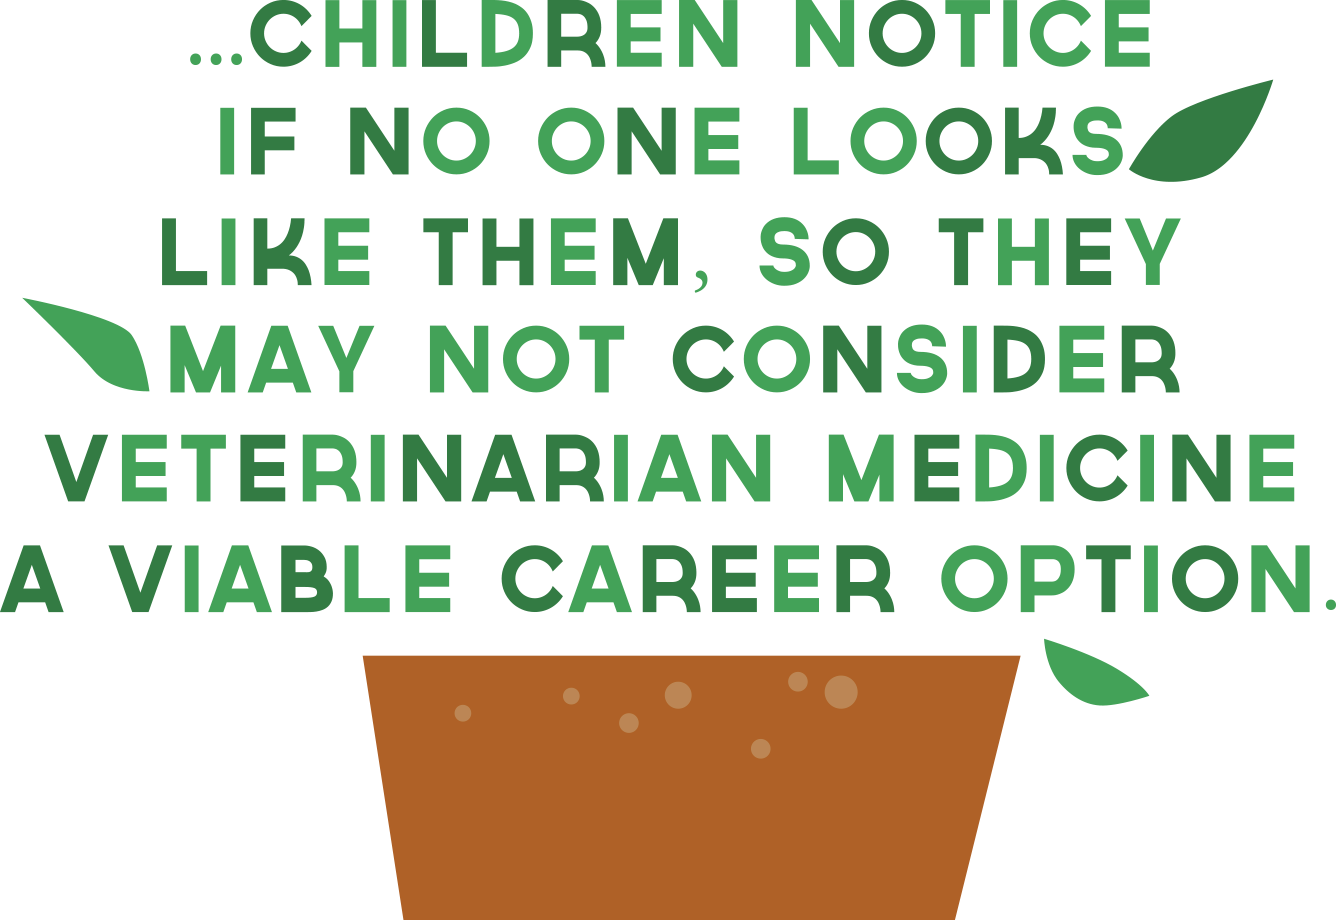 ... Children notice if no one looks like them, so they may not consider veterinarian medicine a viable career option. with illustrated pot under neath